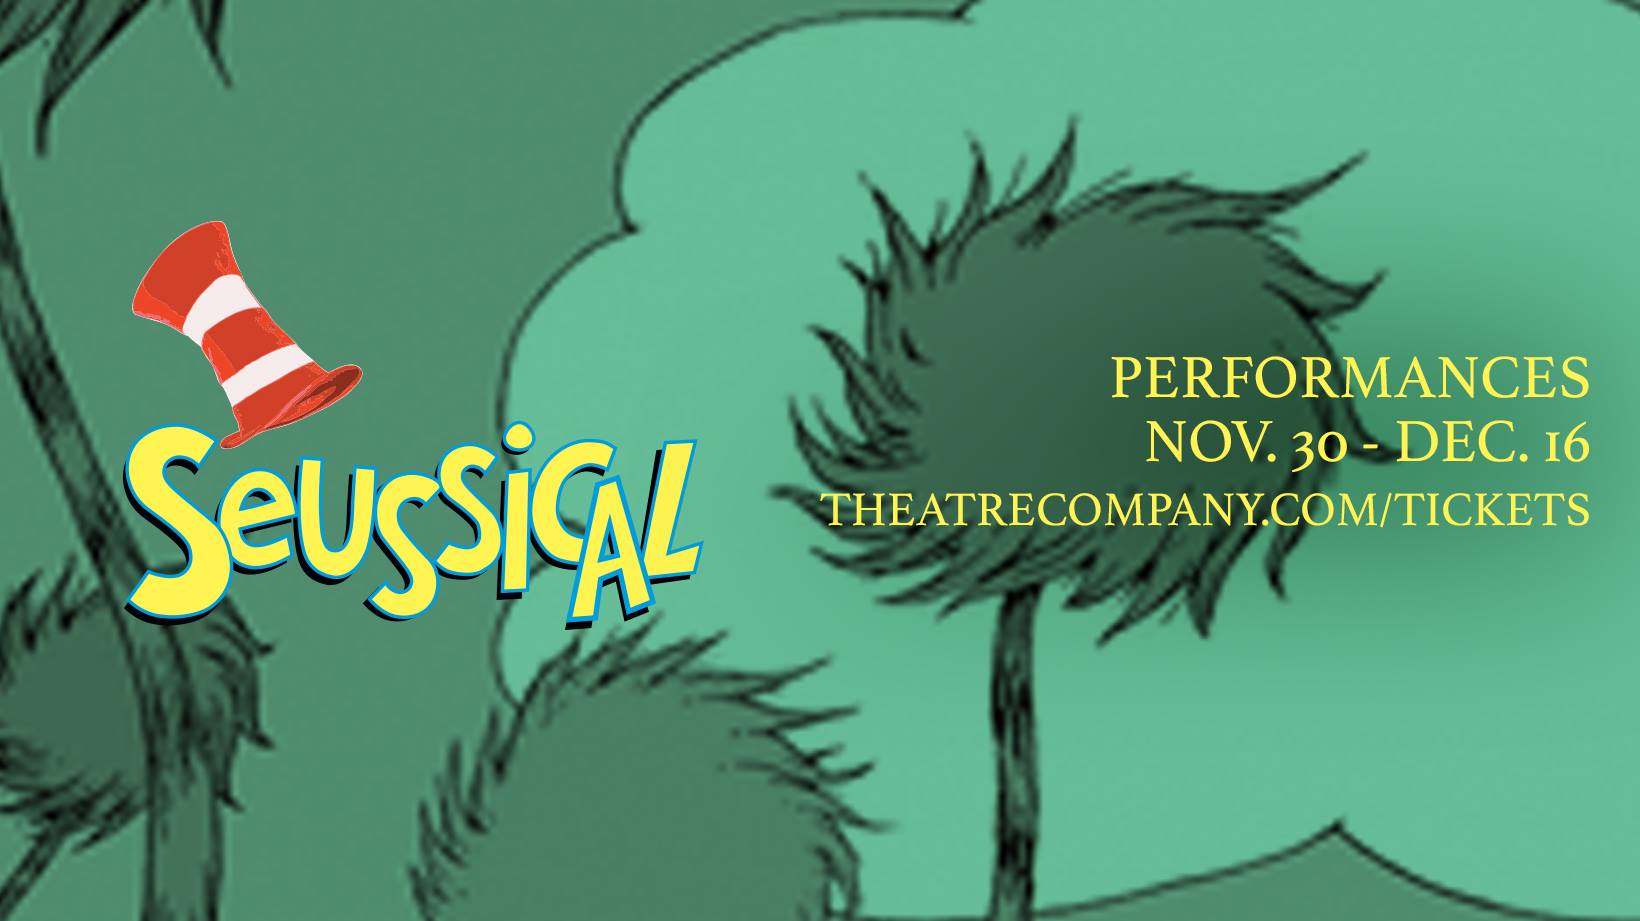 Seussical, the musical by The Theatre Company